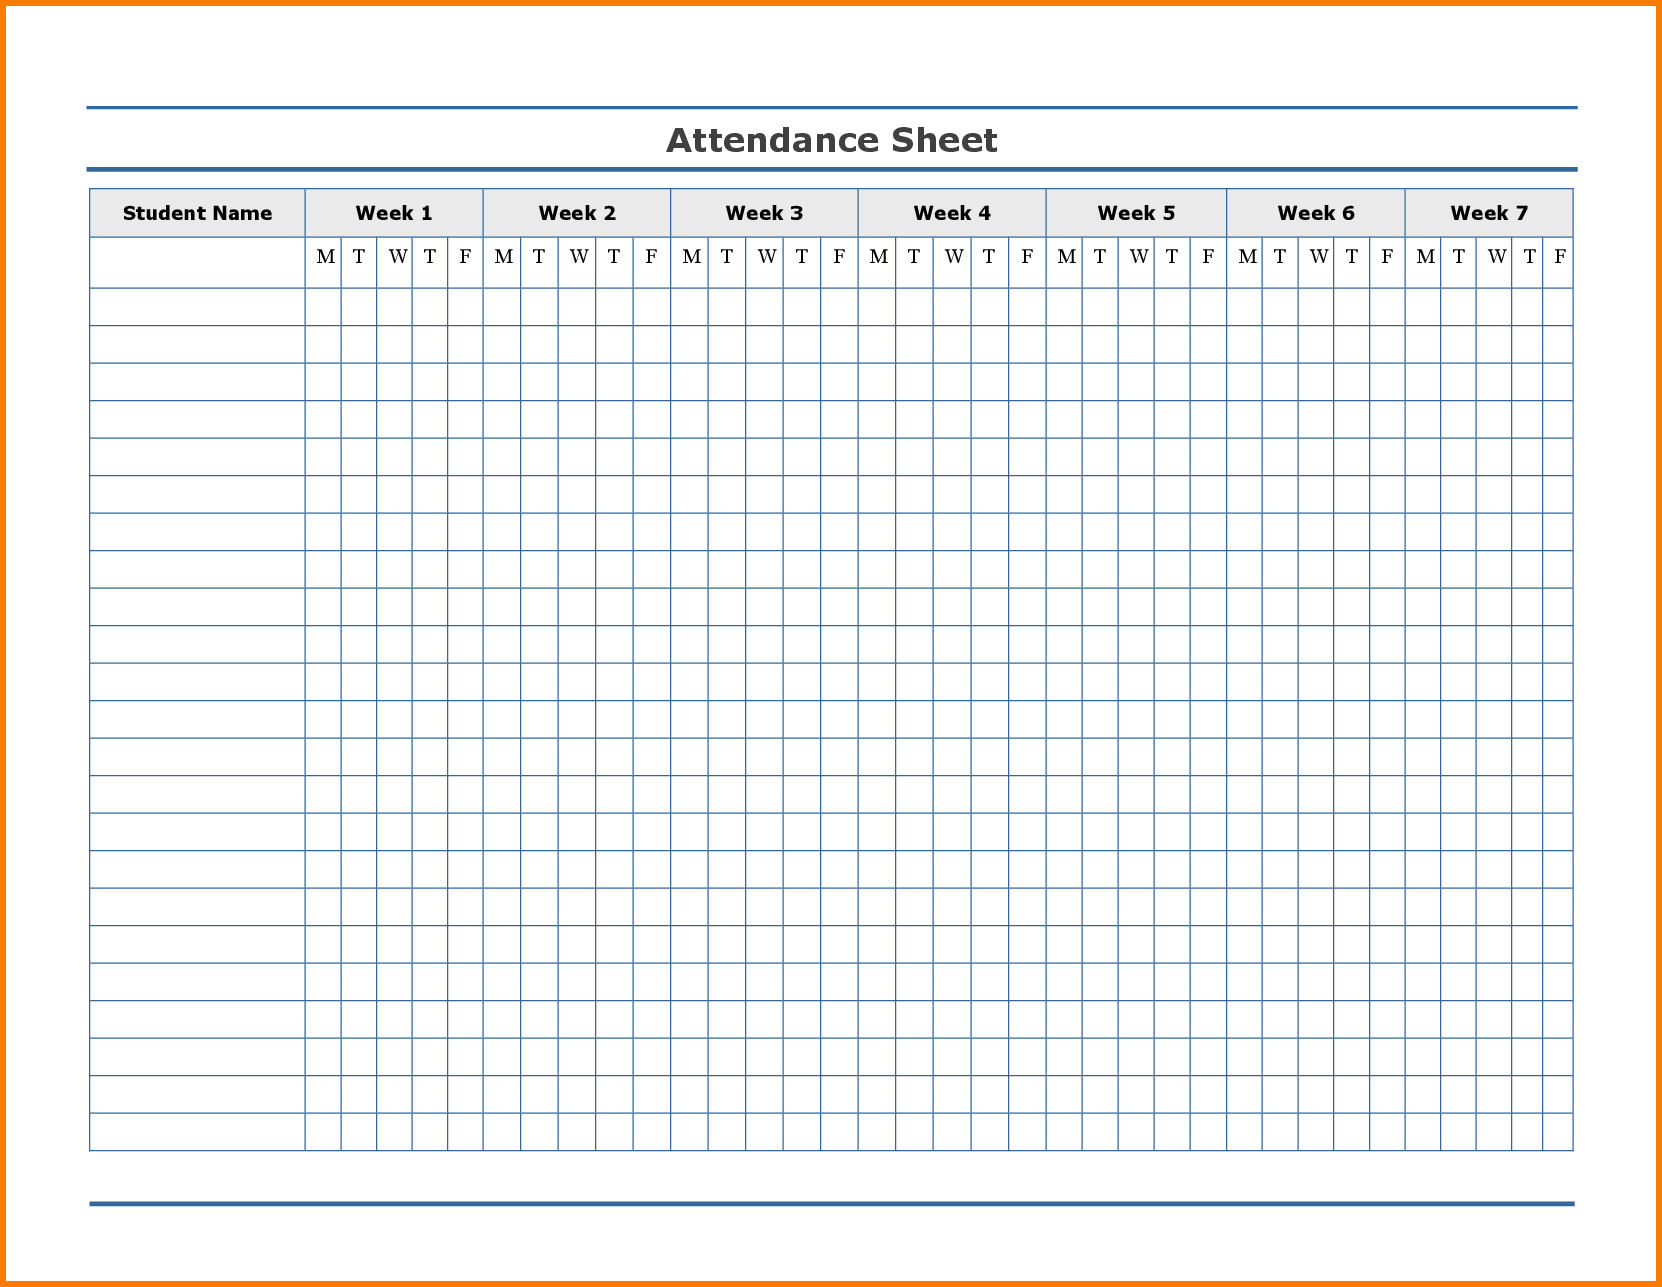 Employee Annual Leave Record Spreadsheet Within Free Employee Attendance Calendar  Employee Tracker Templates 2019